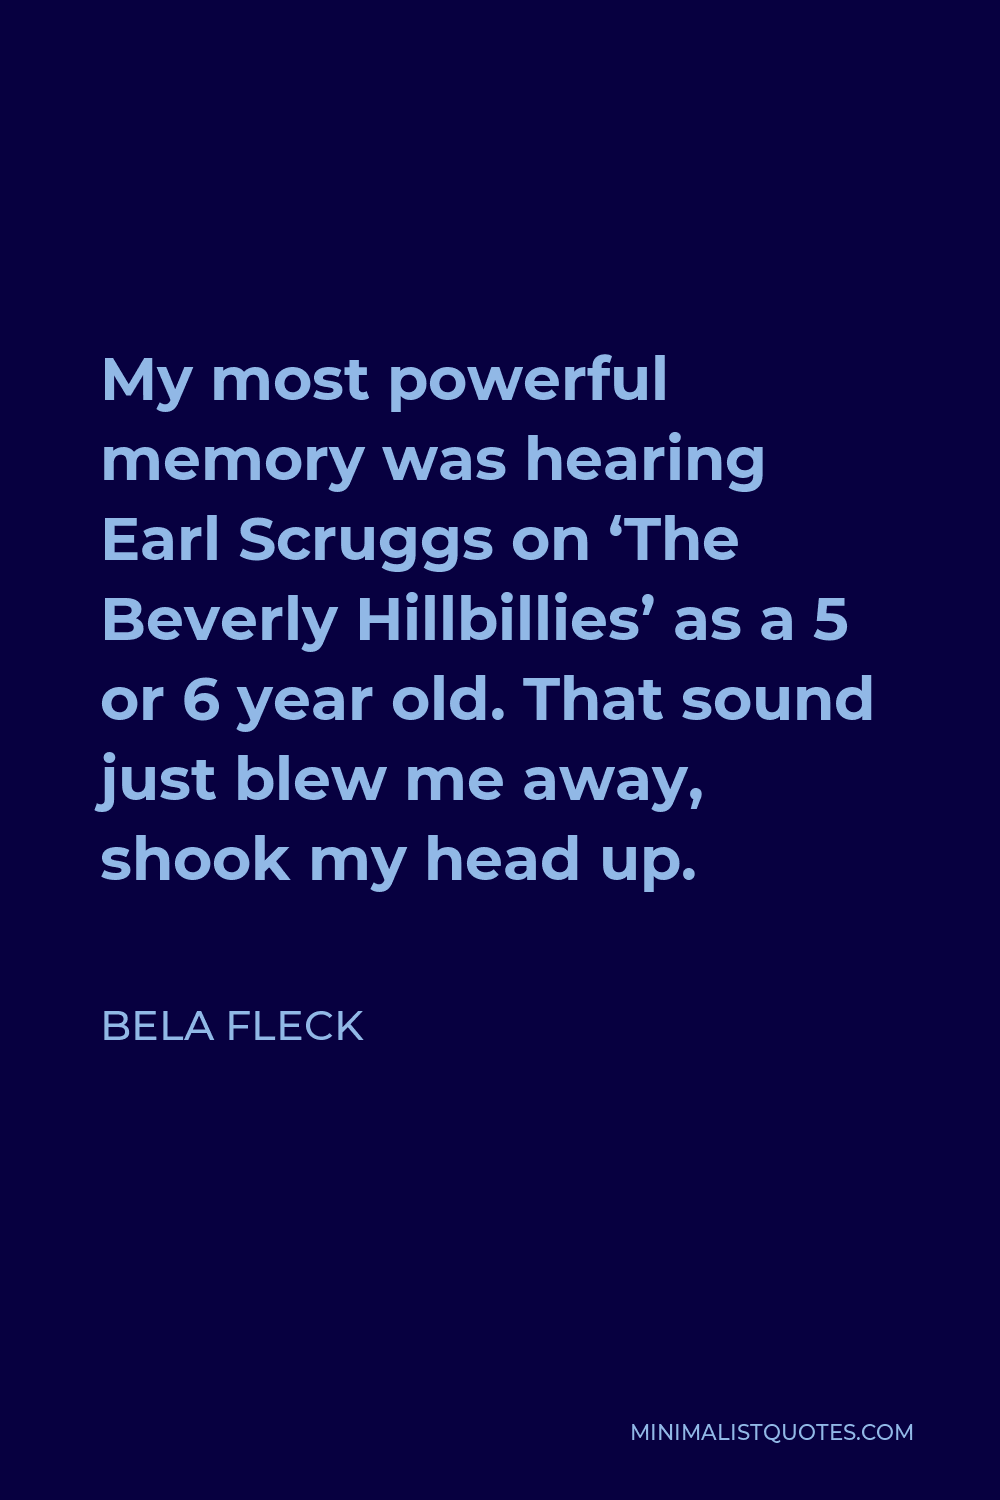 Bela Fleck Quote - My most powerful memory was hearing Earl Scruggs on ‘The Beverly Hillbillies’ as a 5 or 6 year old. That sound just blew me away, shook my head up.